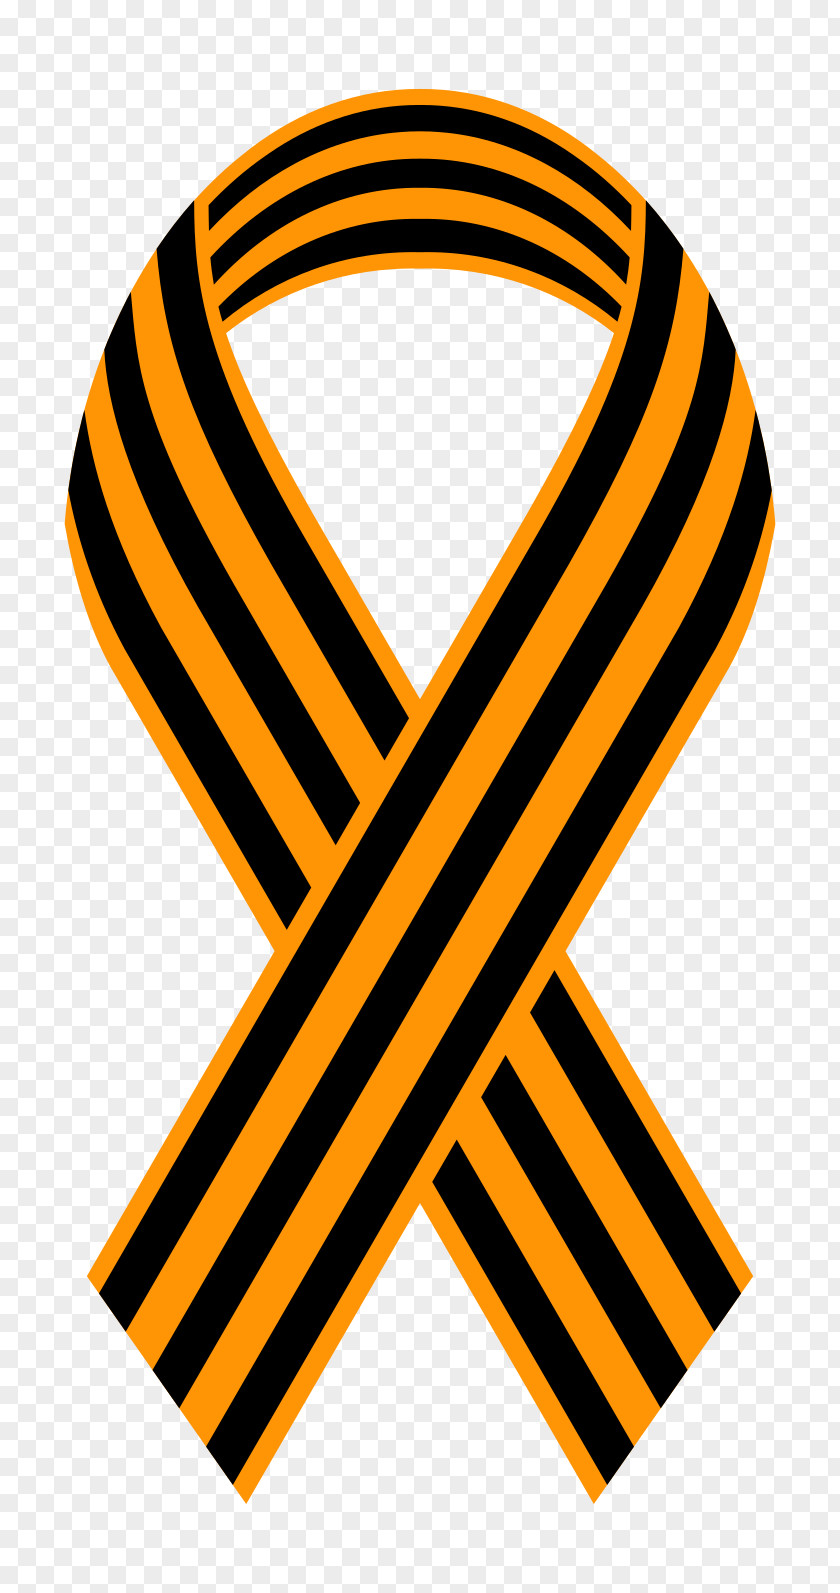 Victory Ribbon Of Saint George 2014 Pro-Russian Unrest In Ukraine Yellow PNG